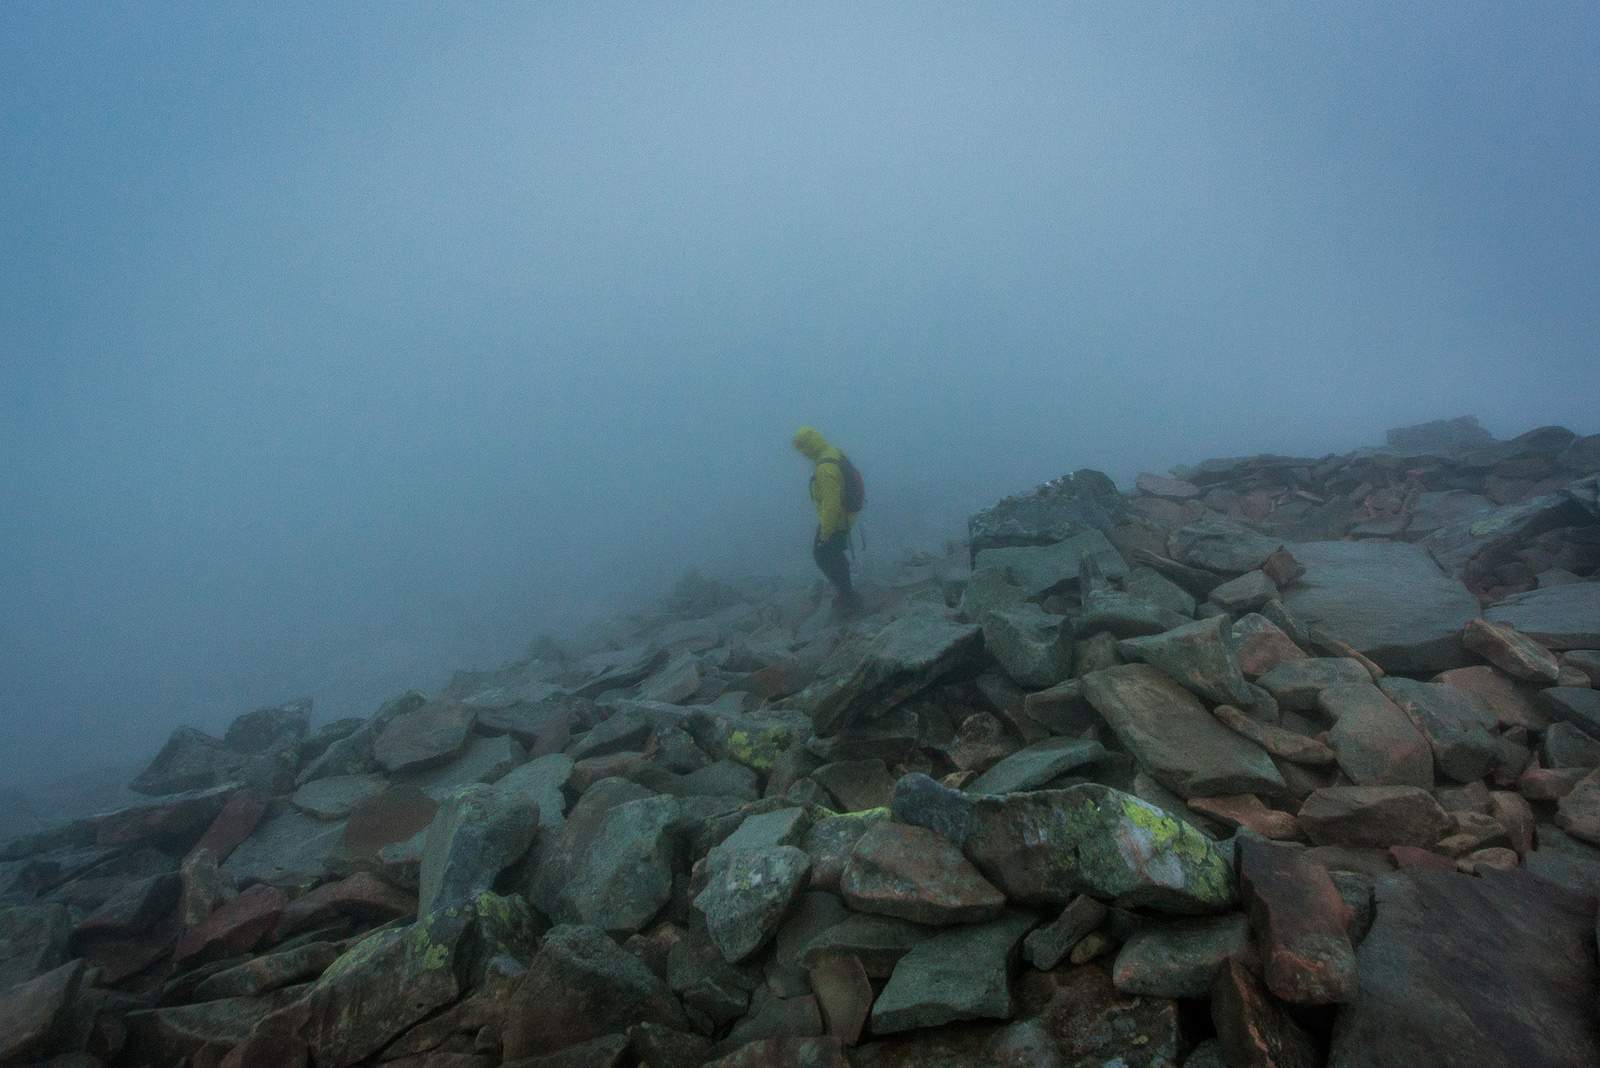 It was unfriendly out there, because of cold wind and clouds covering the summit